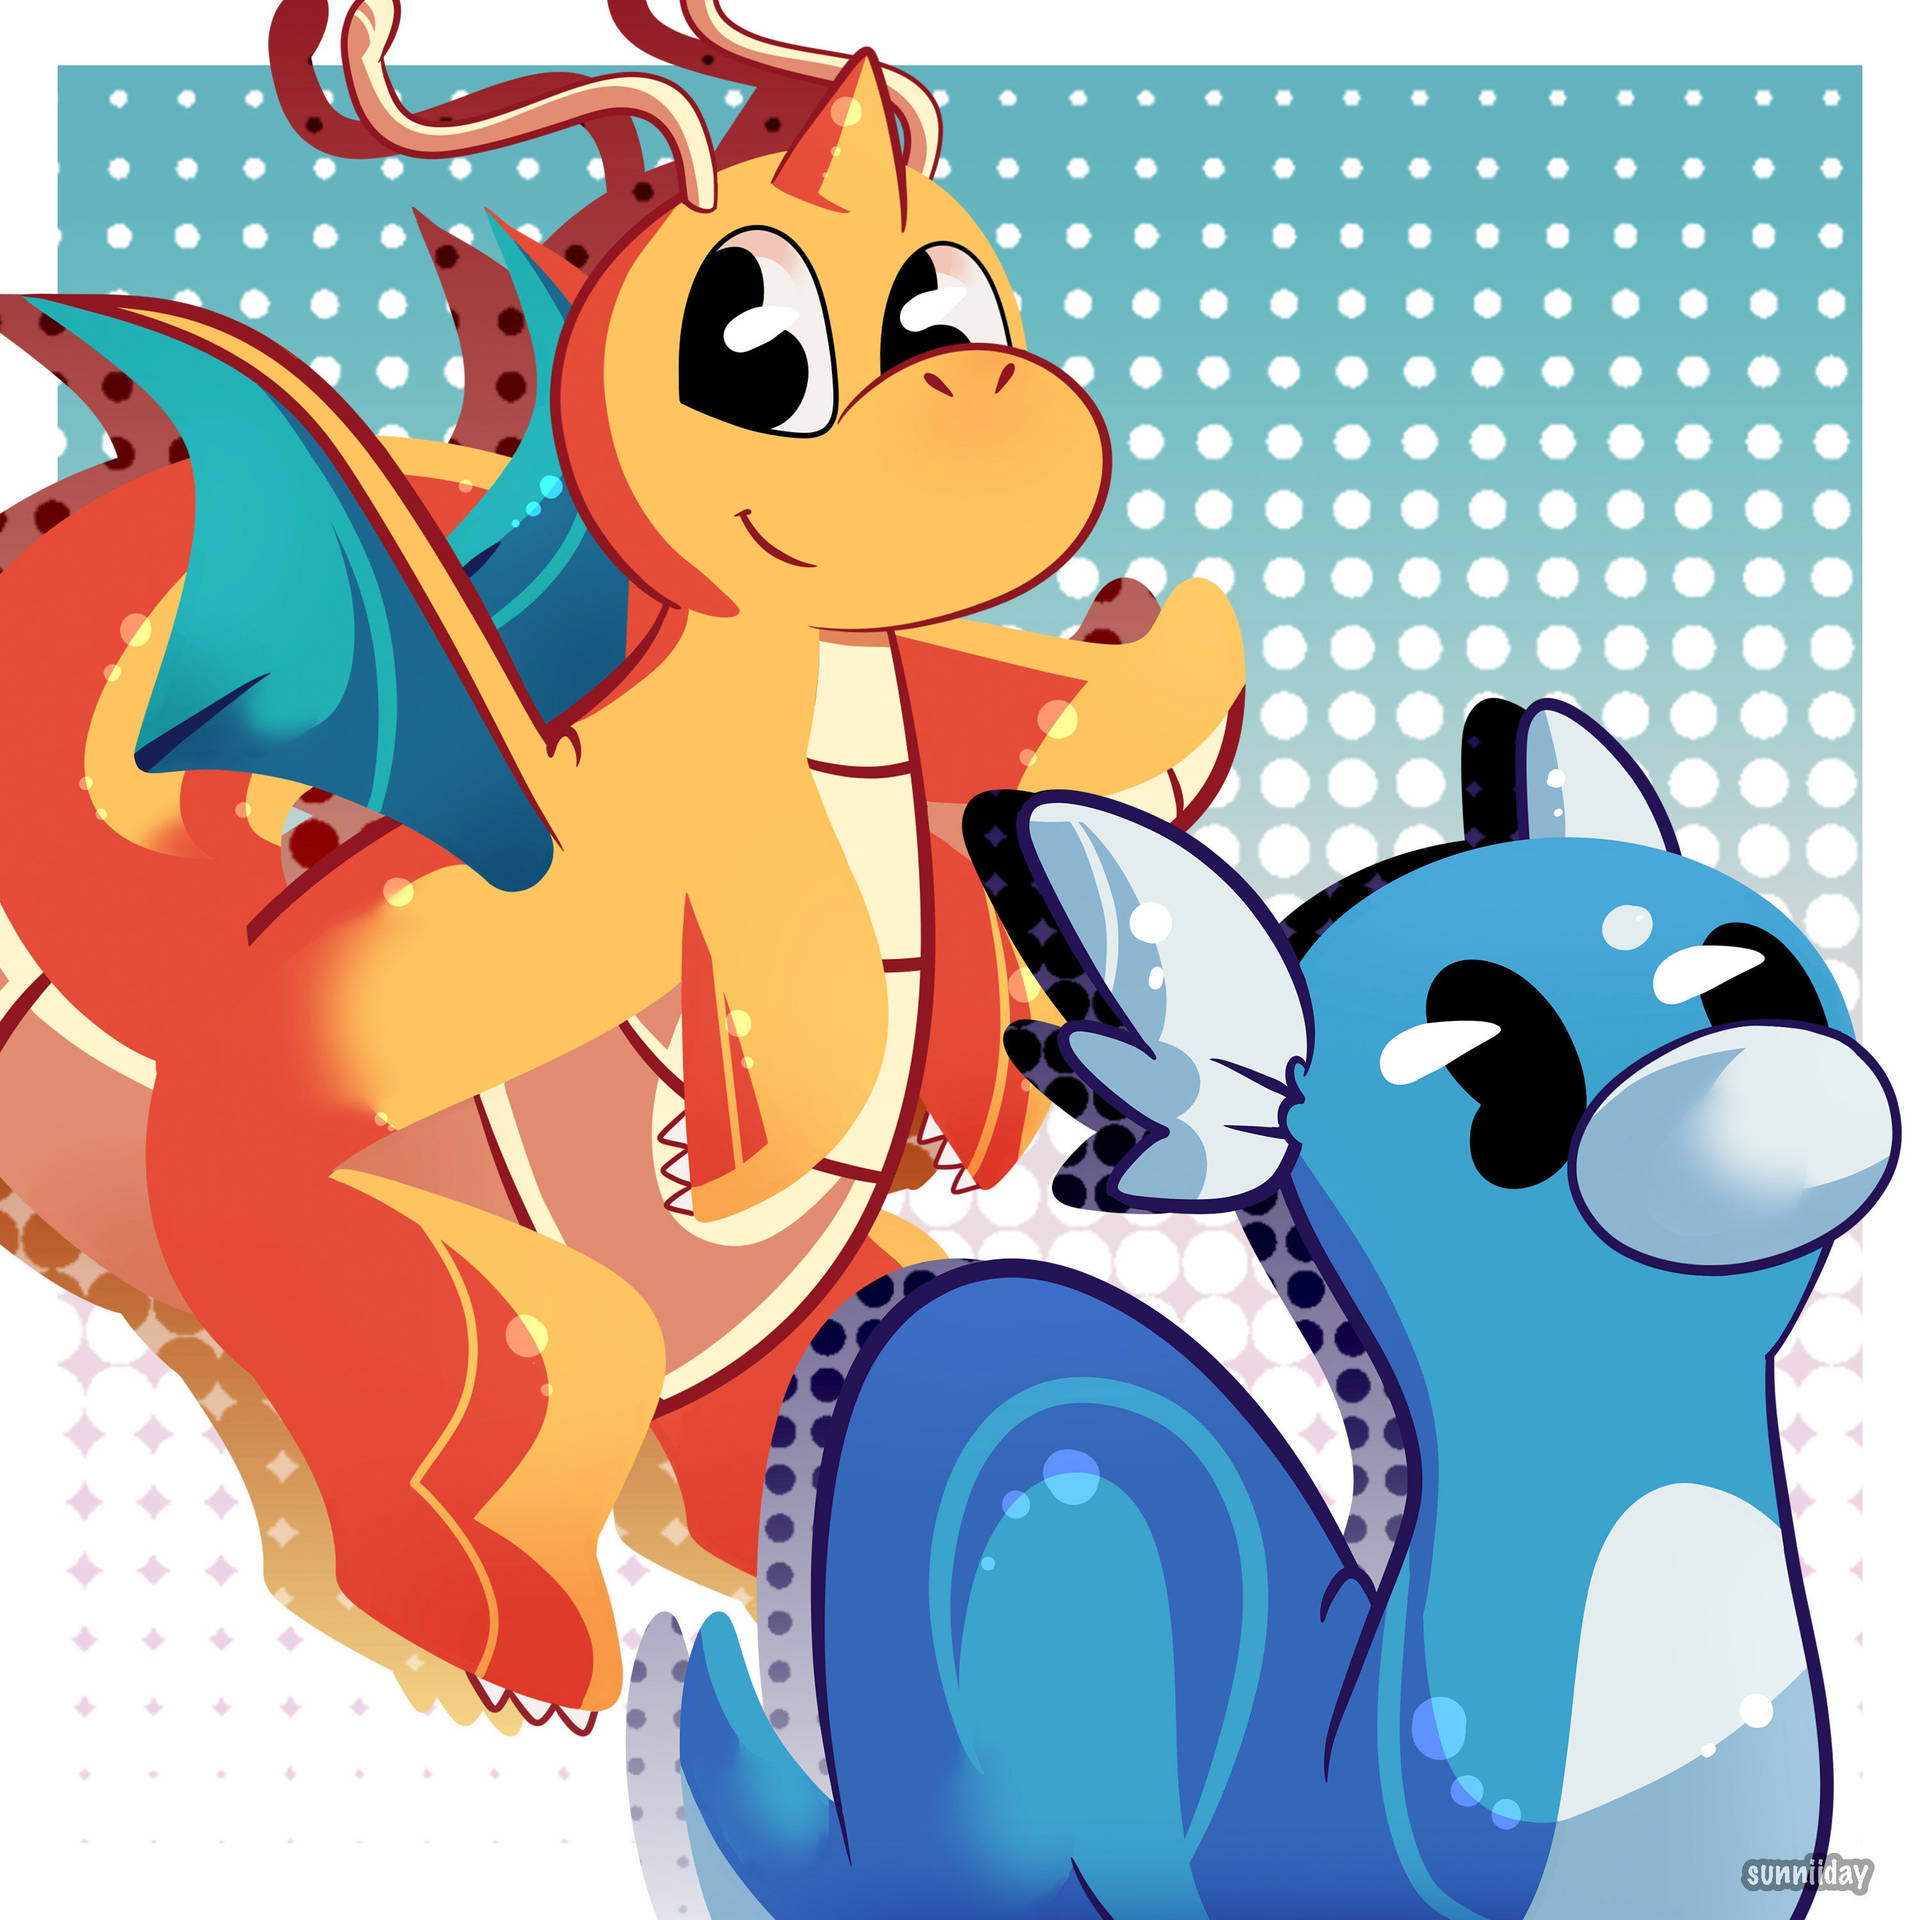 Flying Side By Side, Dragonite And Dratini Grace The Skies. Background